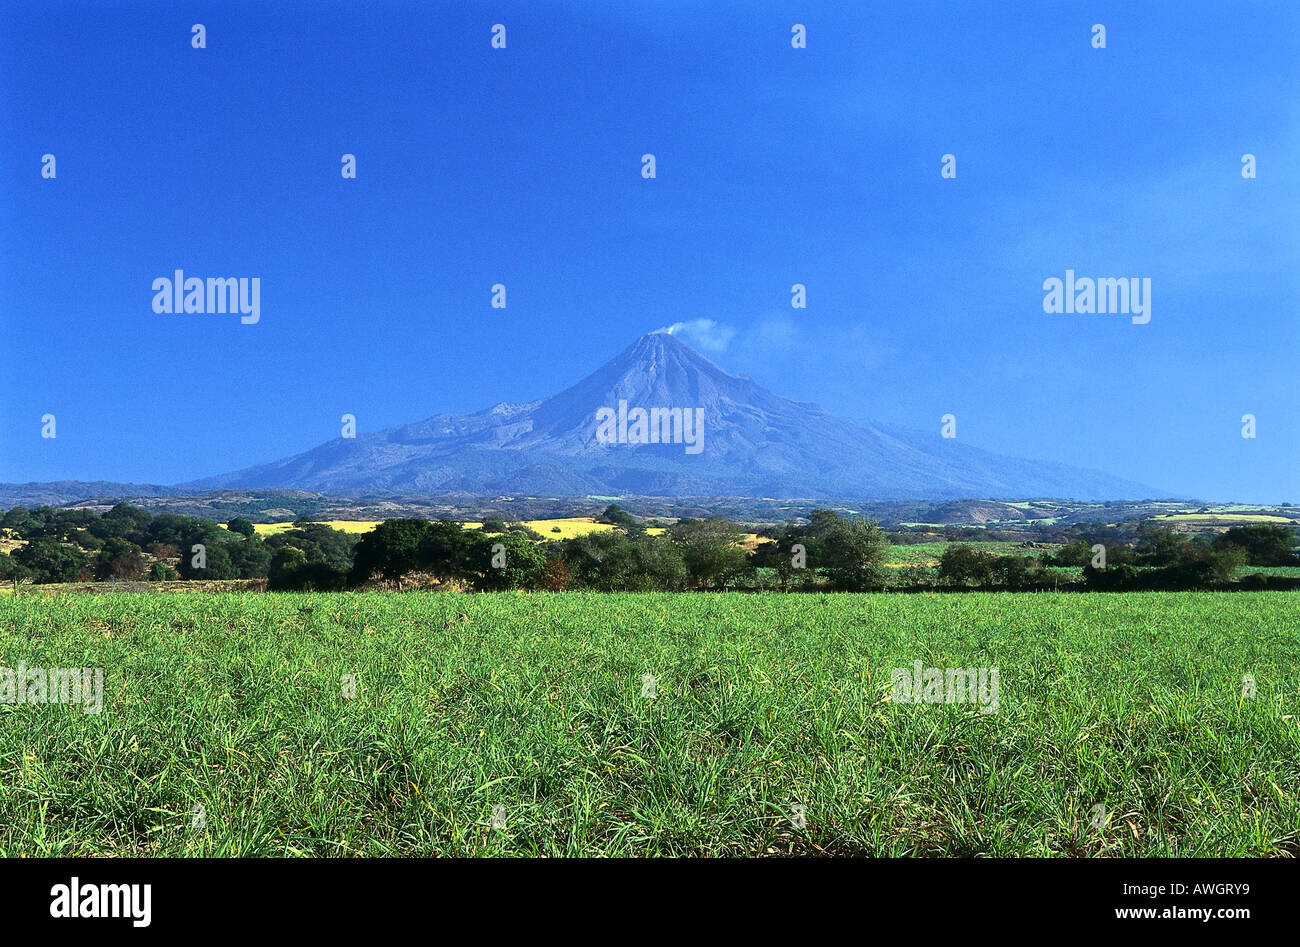 Volcan de Fuego, seen from the road heading out of Colima toward Guadalajara, Mexico. Stock Photo